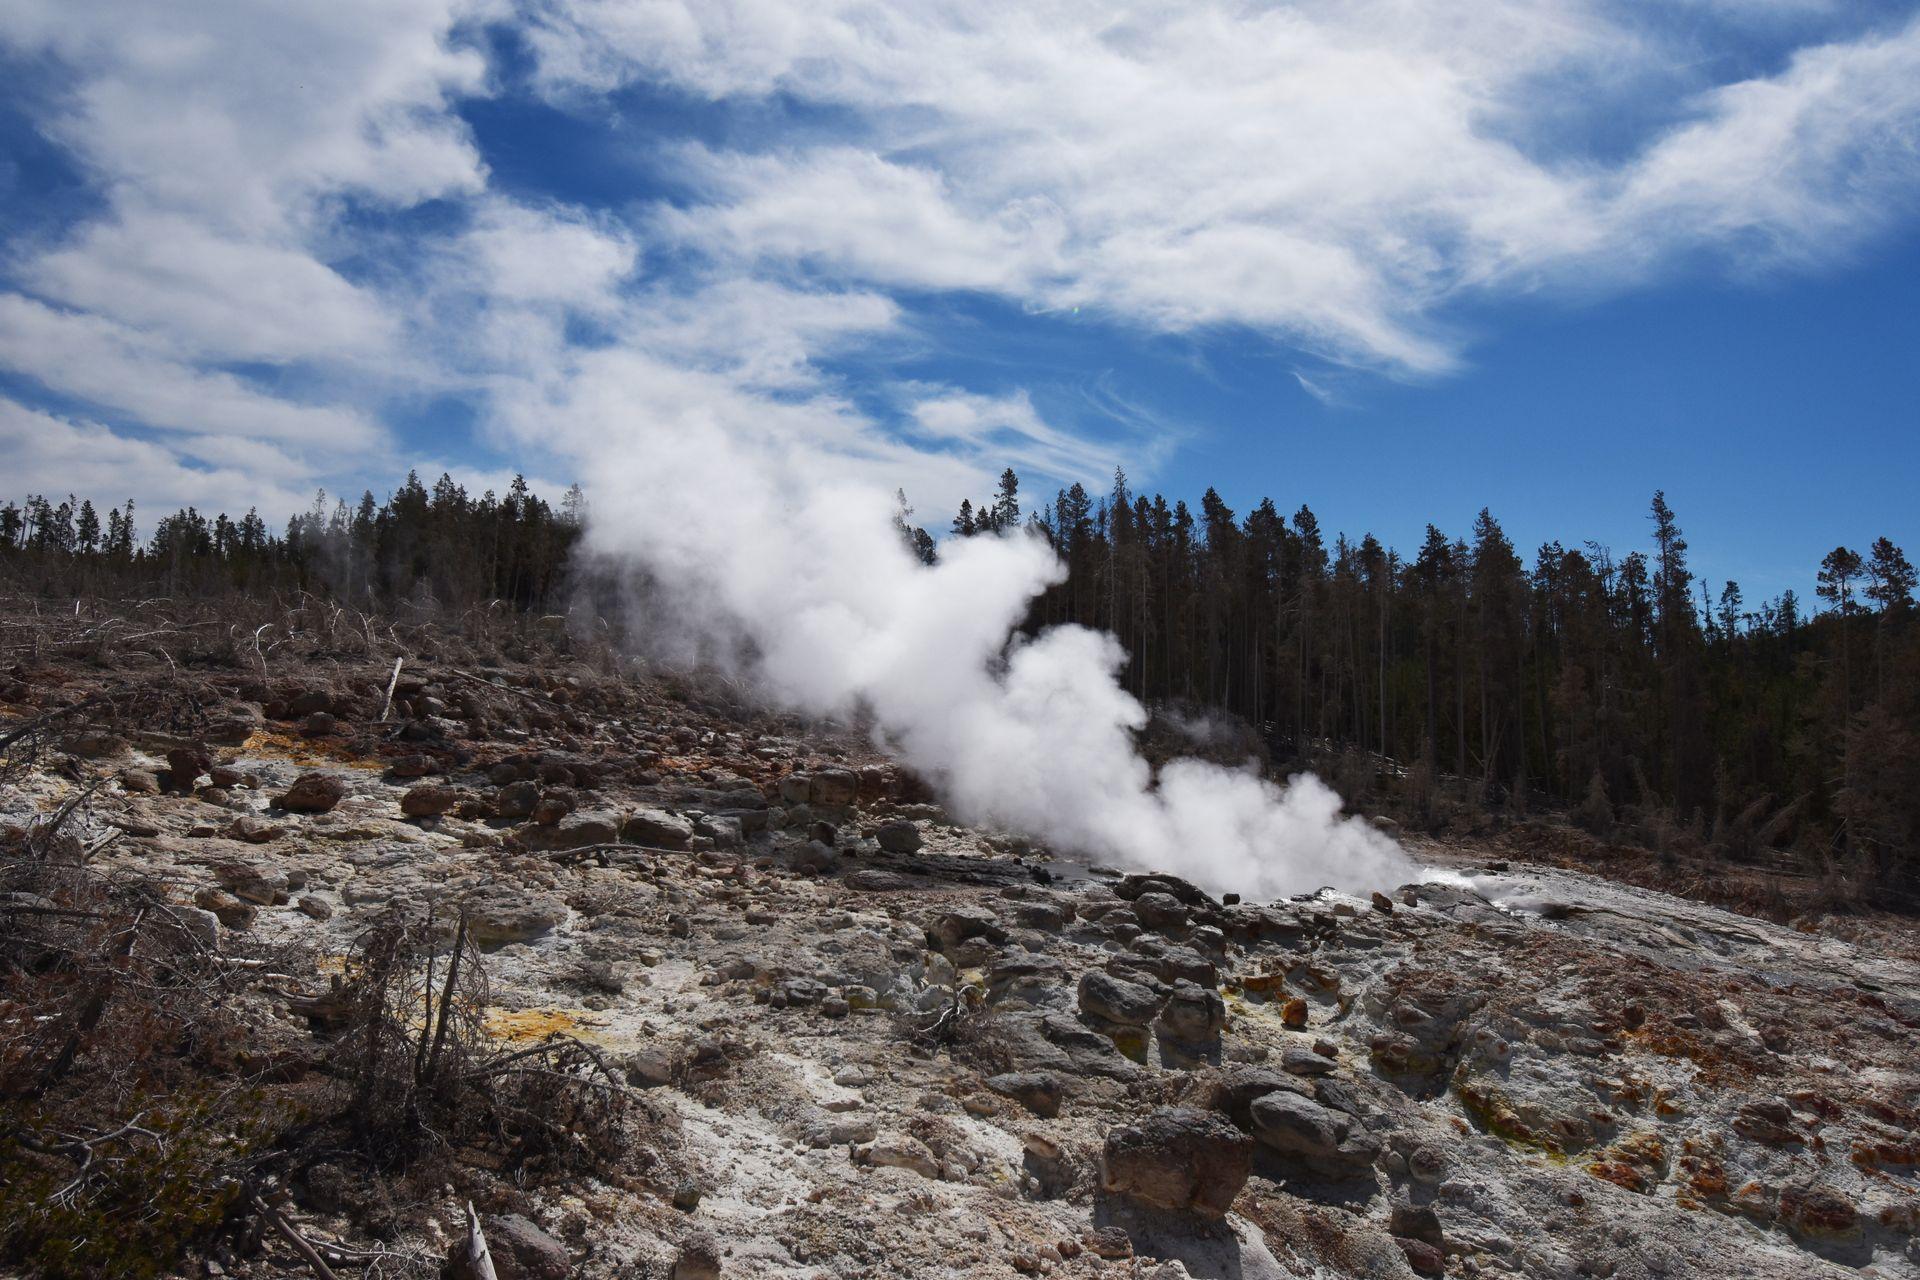 Steam rising up from Steamboat Geyser.